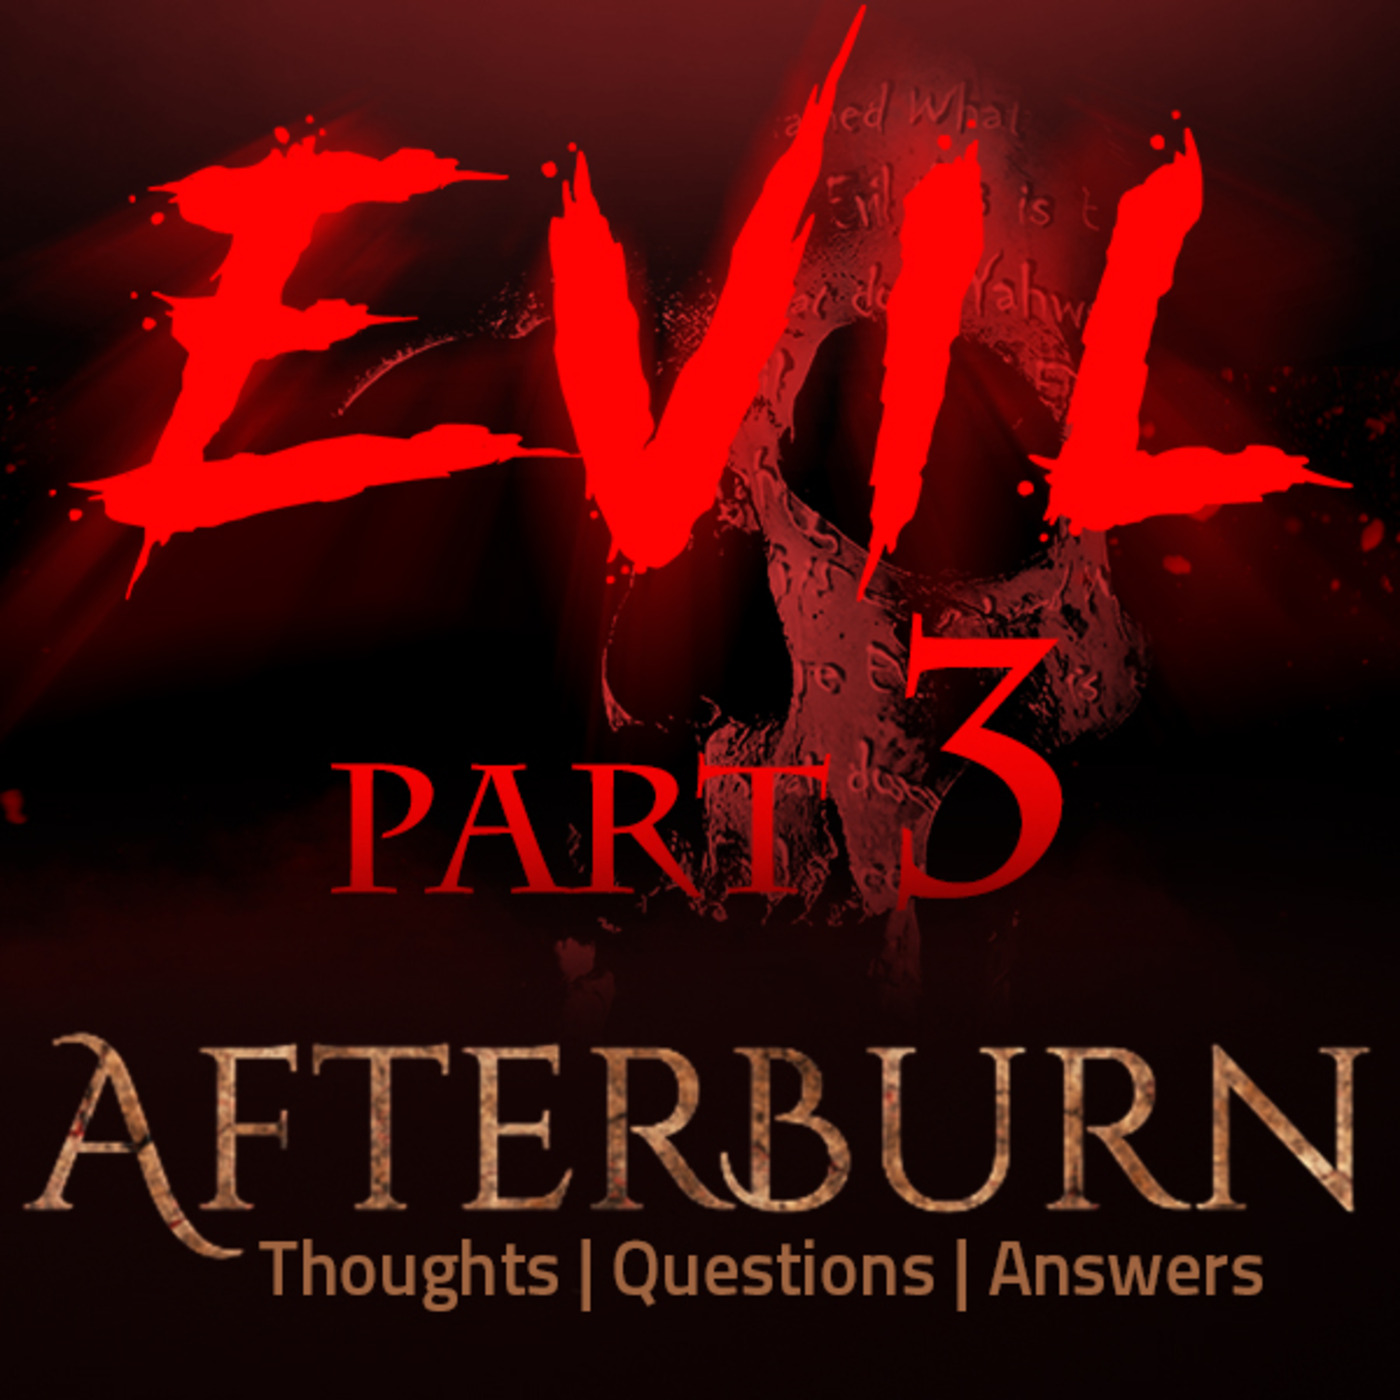 Episode 707: Afterburn | Thoughts, Q&A on Evil | Part 3